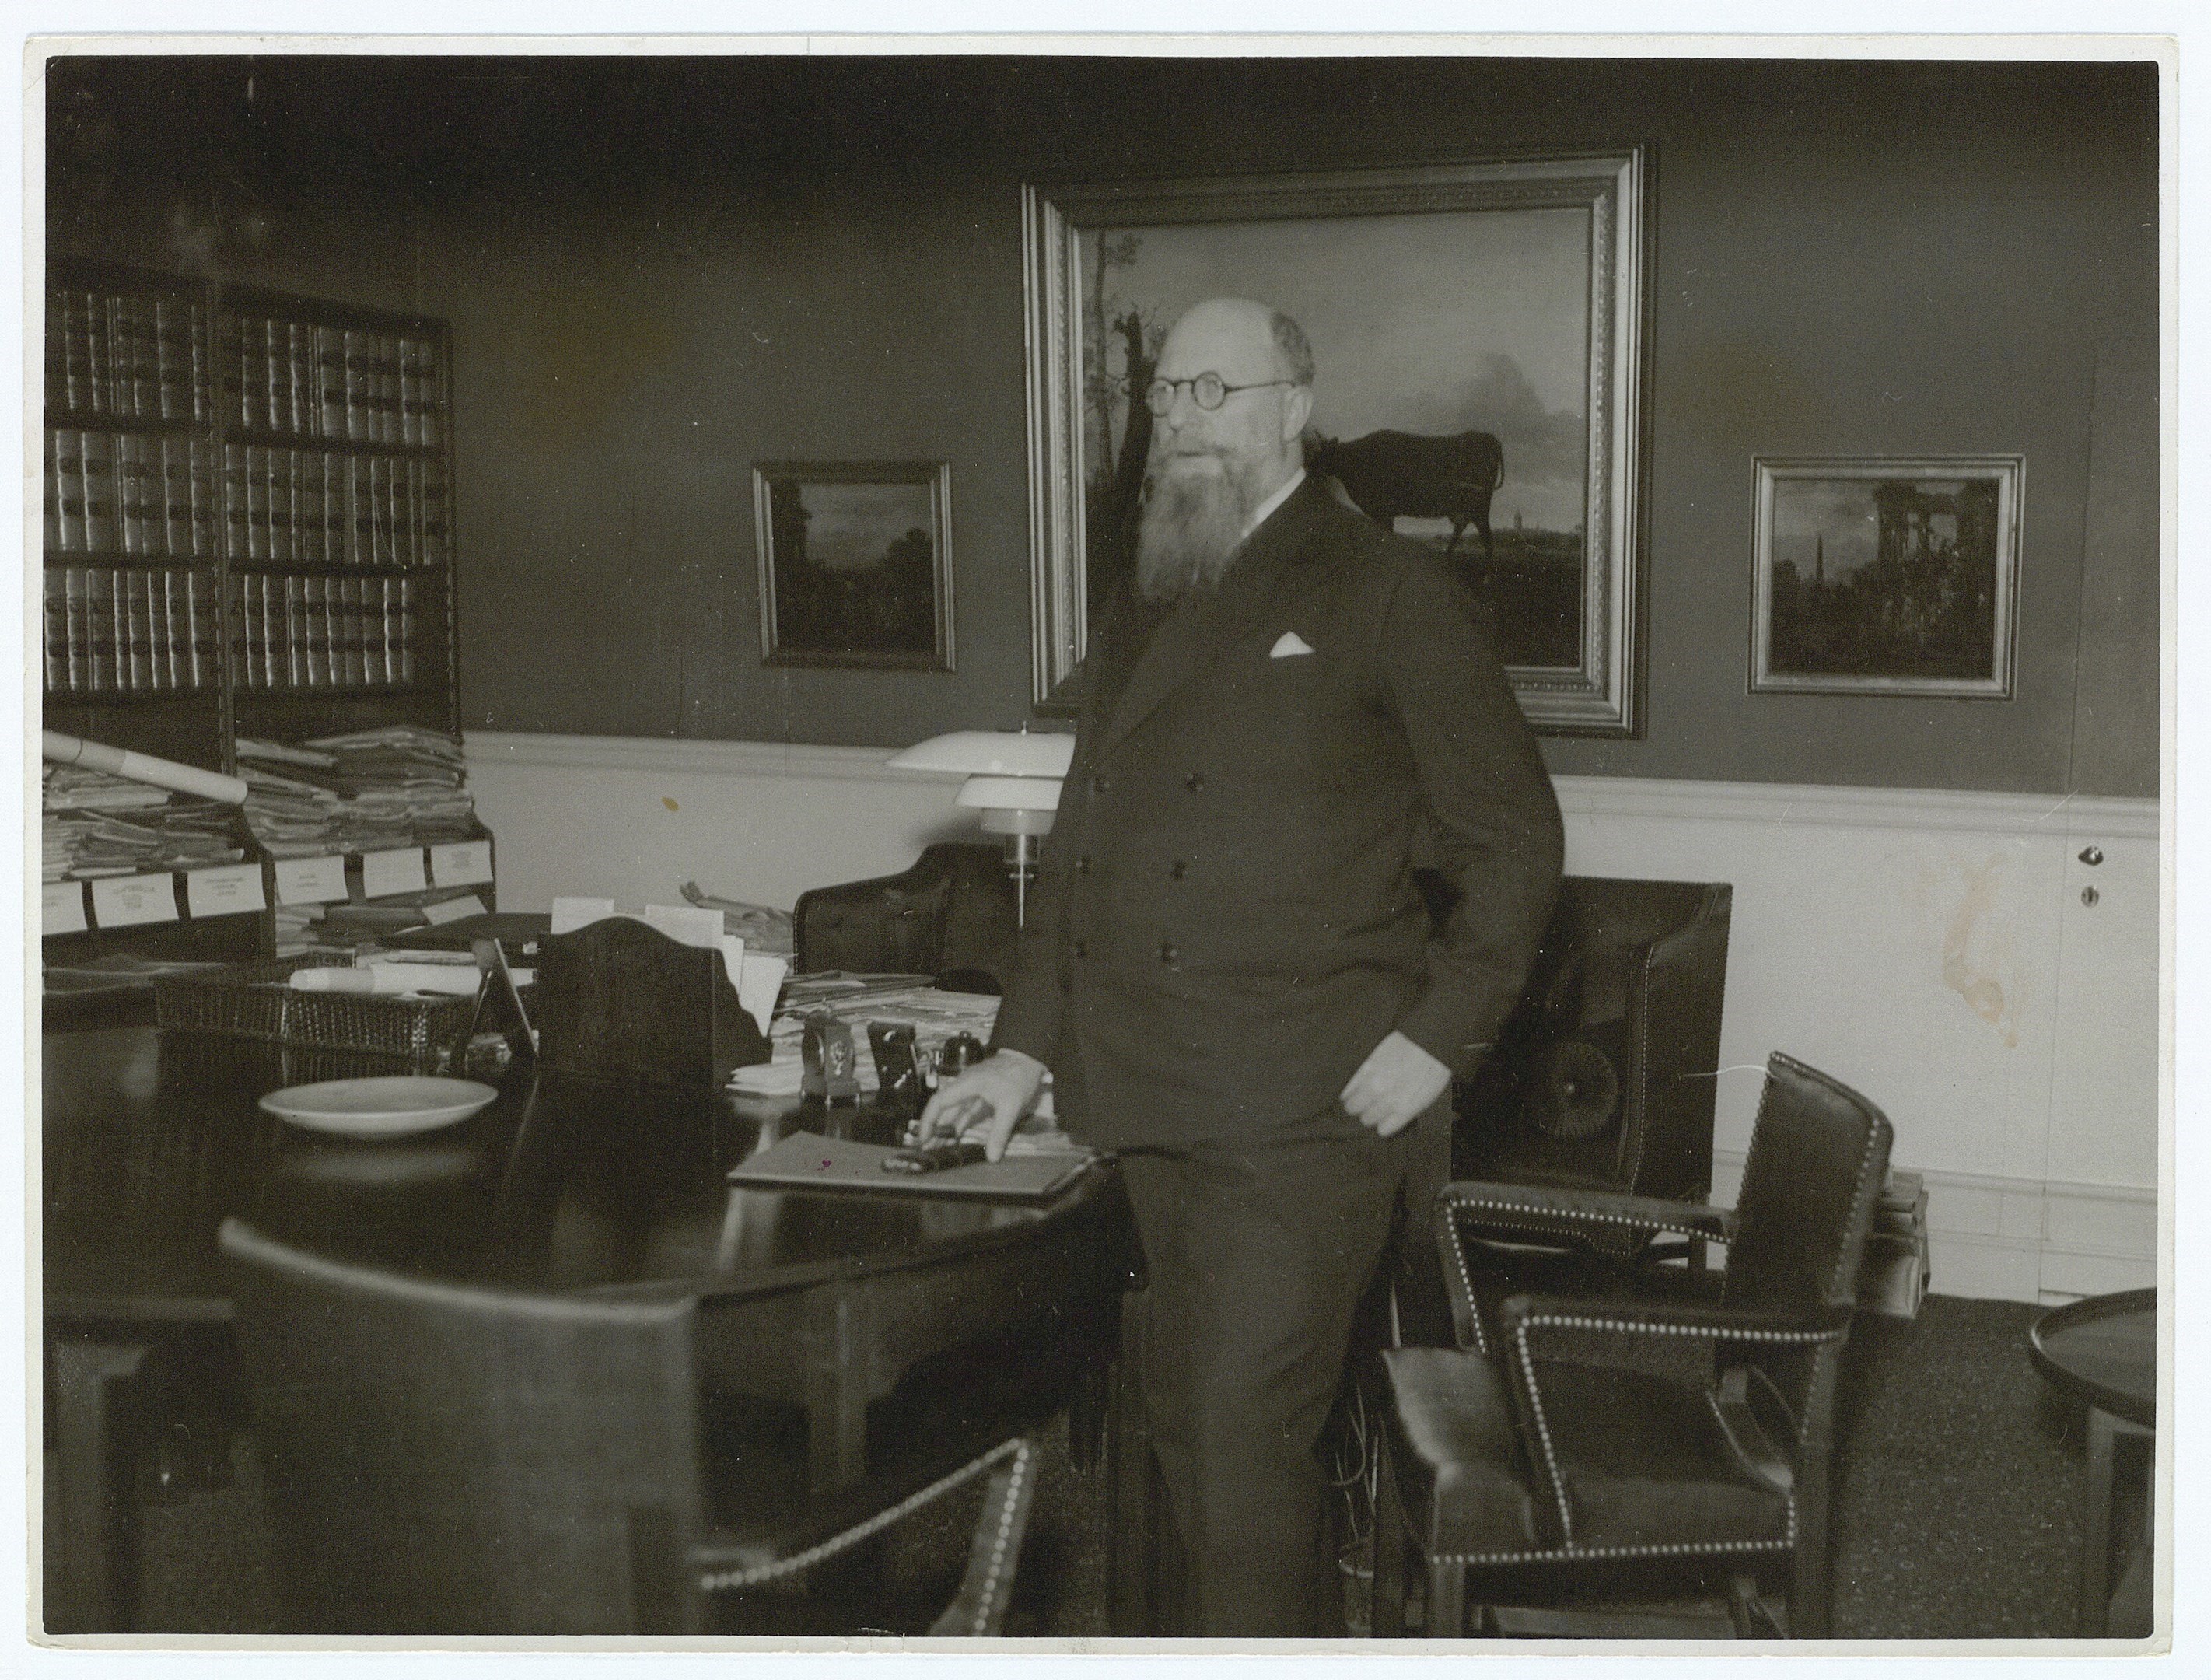 Thorvald Stauning in his office decorated with furniture designed by Kaare Klint. Photo credits: Royal Danish Library 